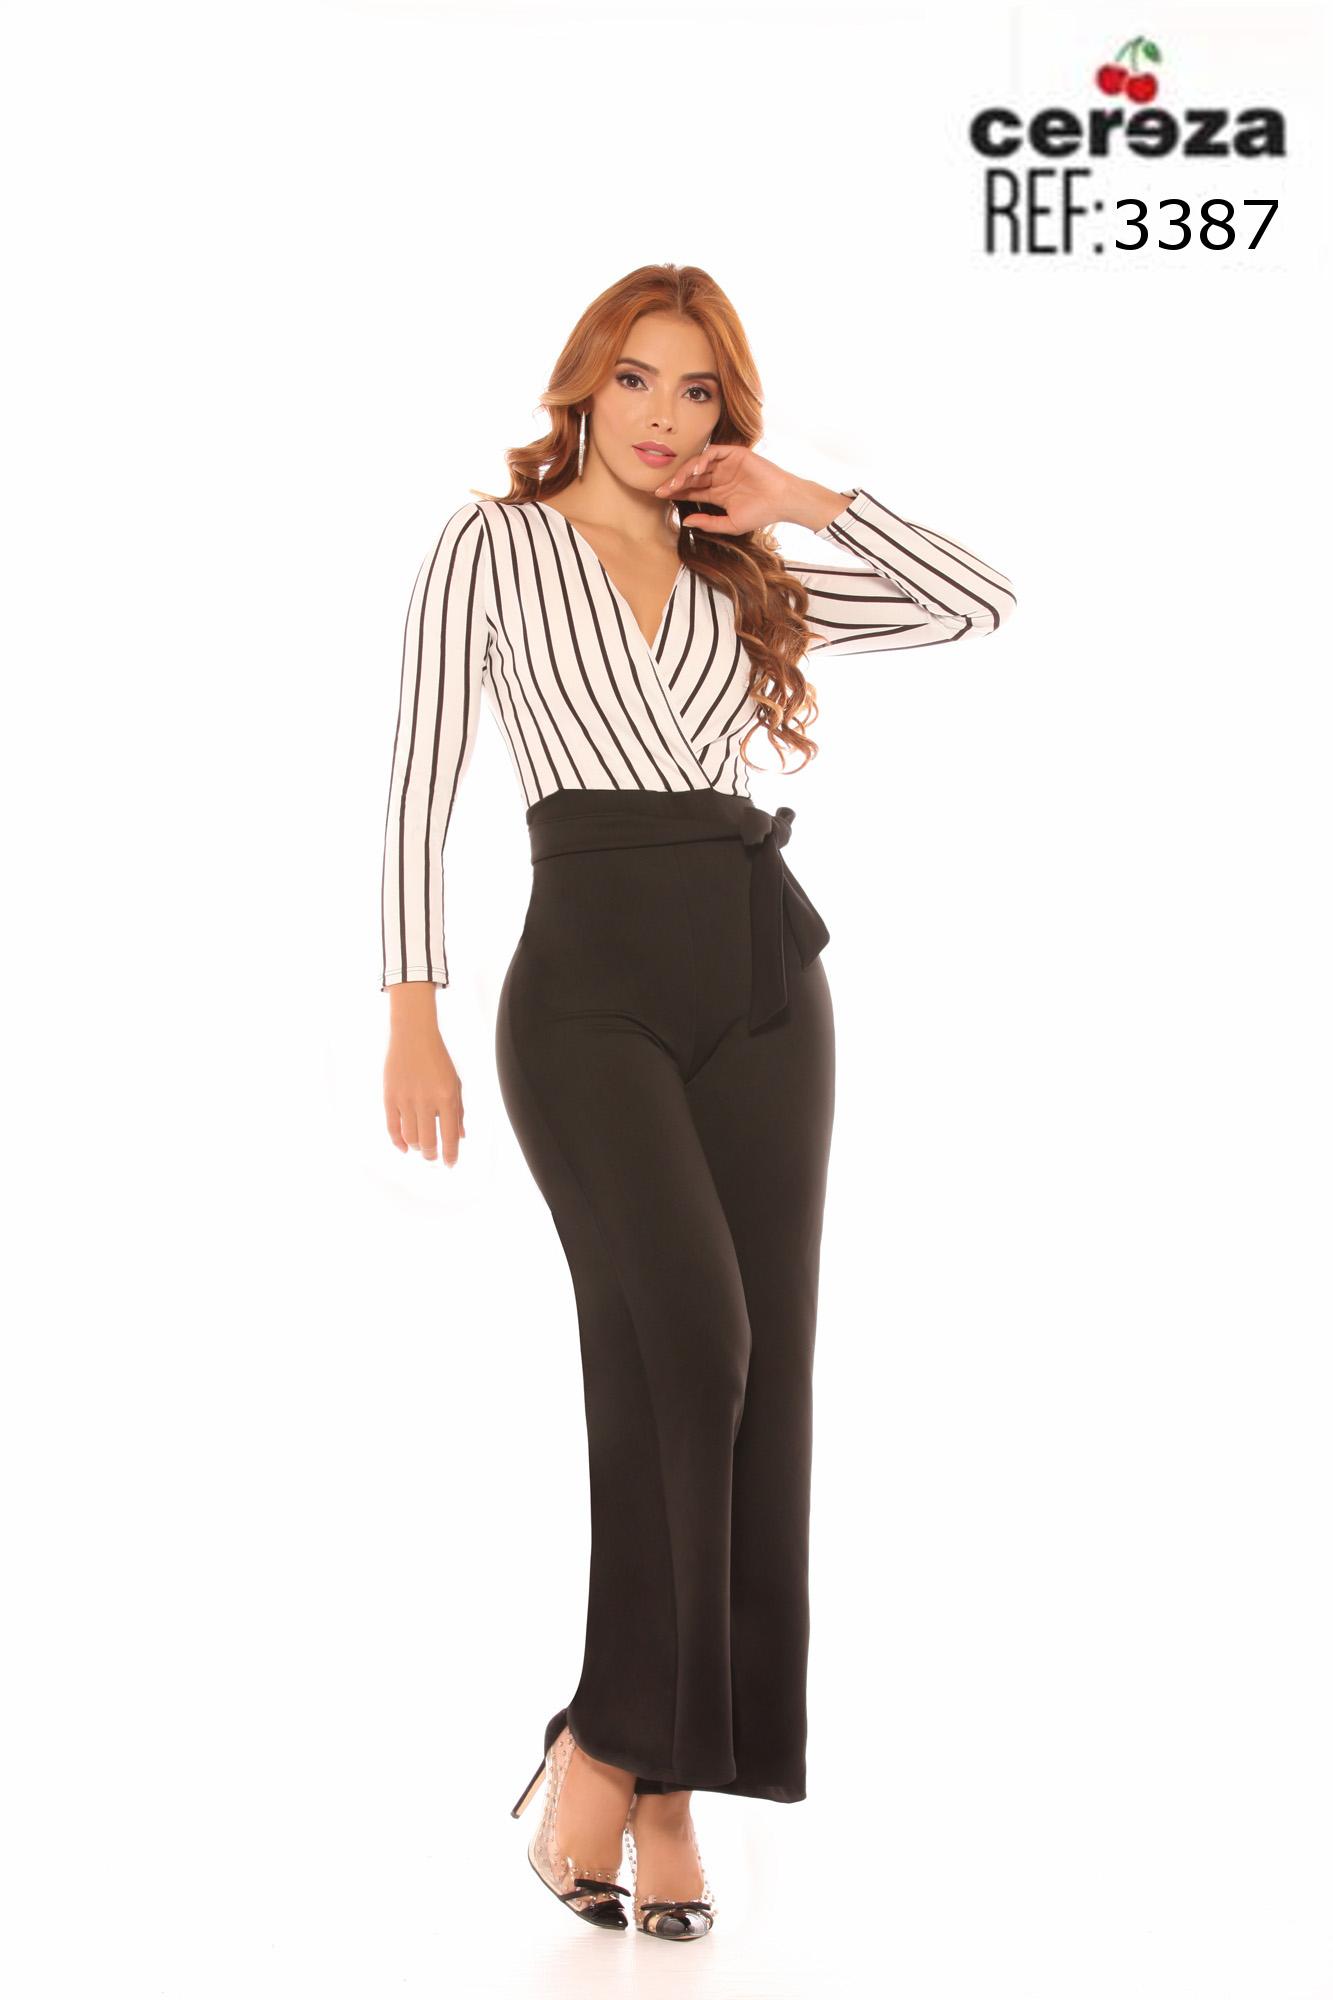 Beautiful Colombian Stripe Jumpsuit for Christmas